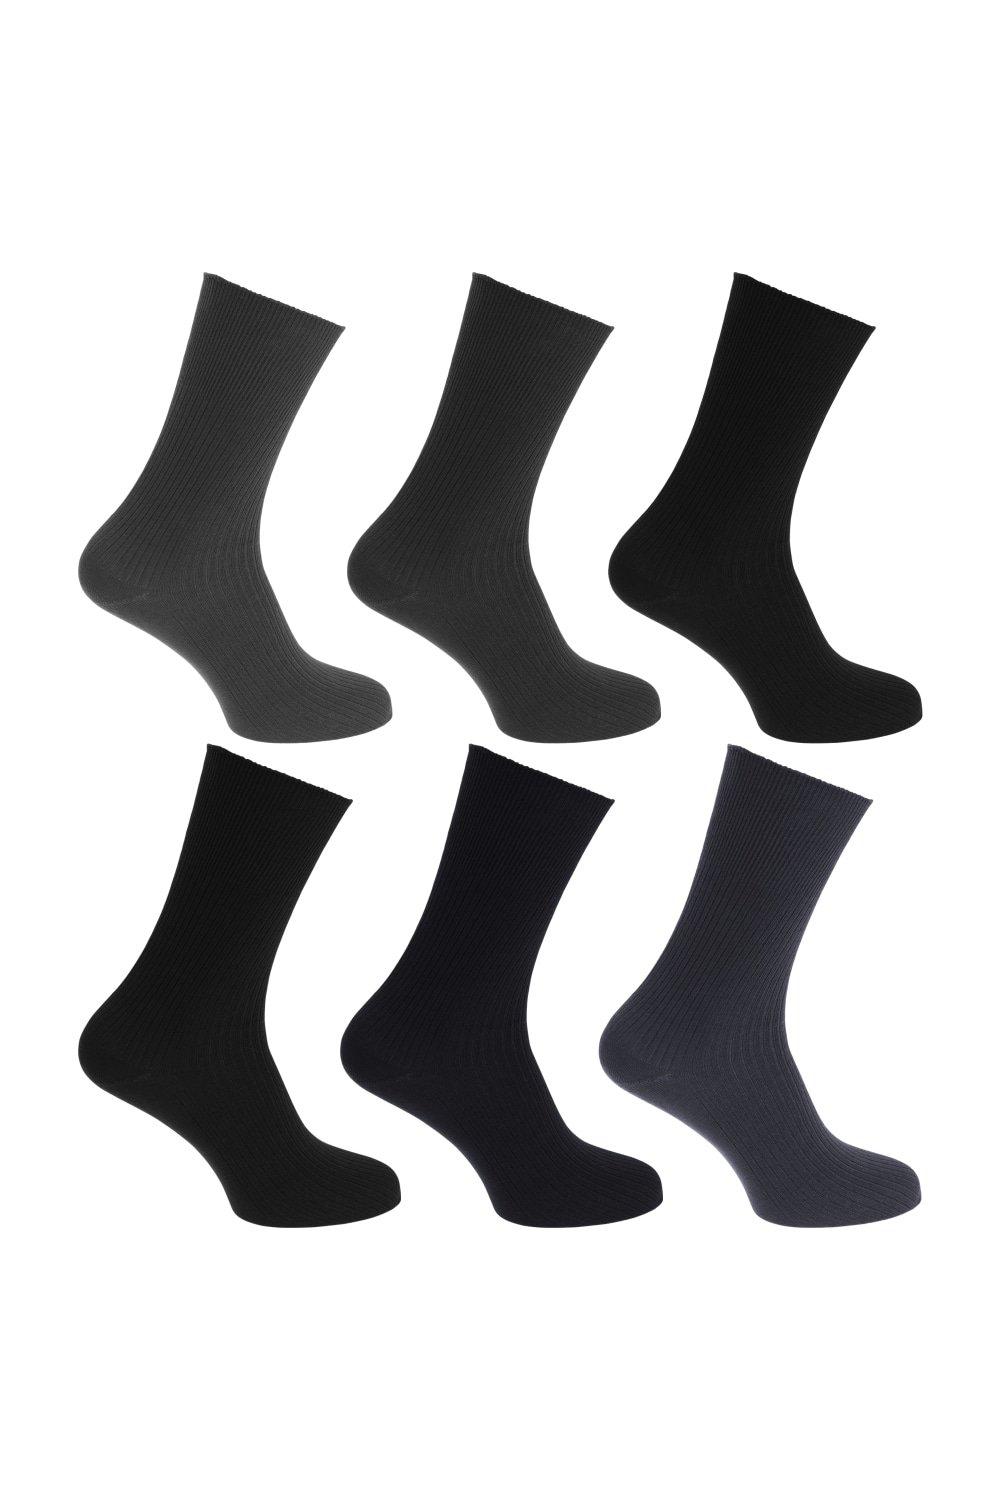 Bamboo Super Soft Work/Casual Non Elastic Top Socks (Pack Of 6)